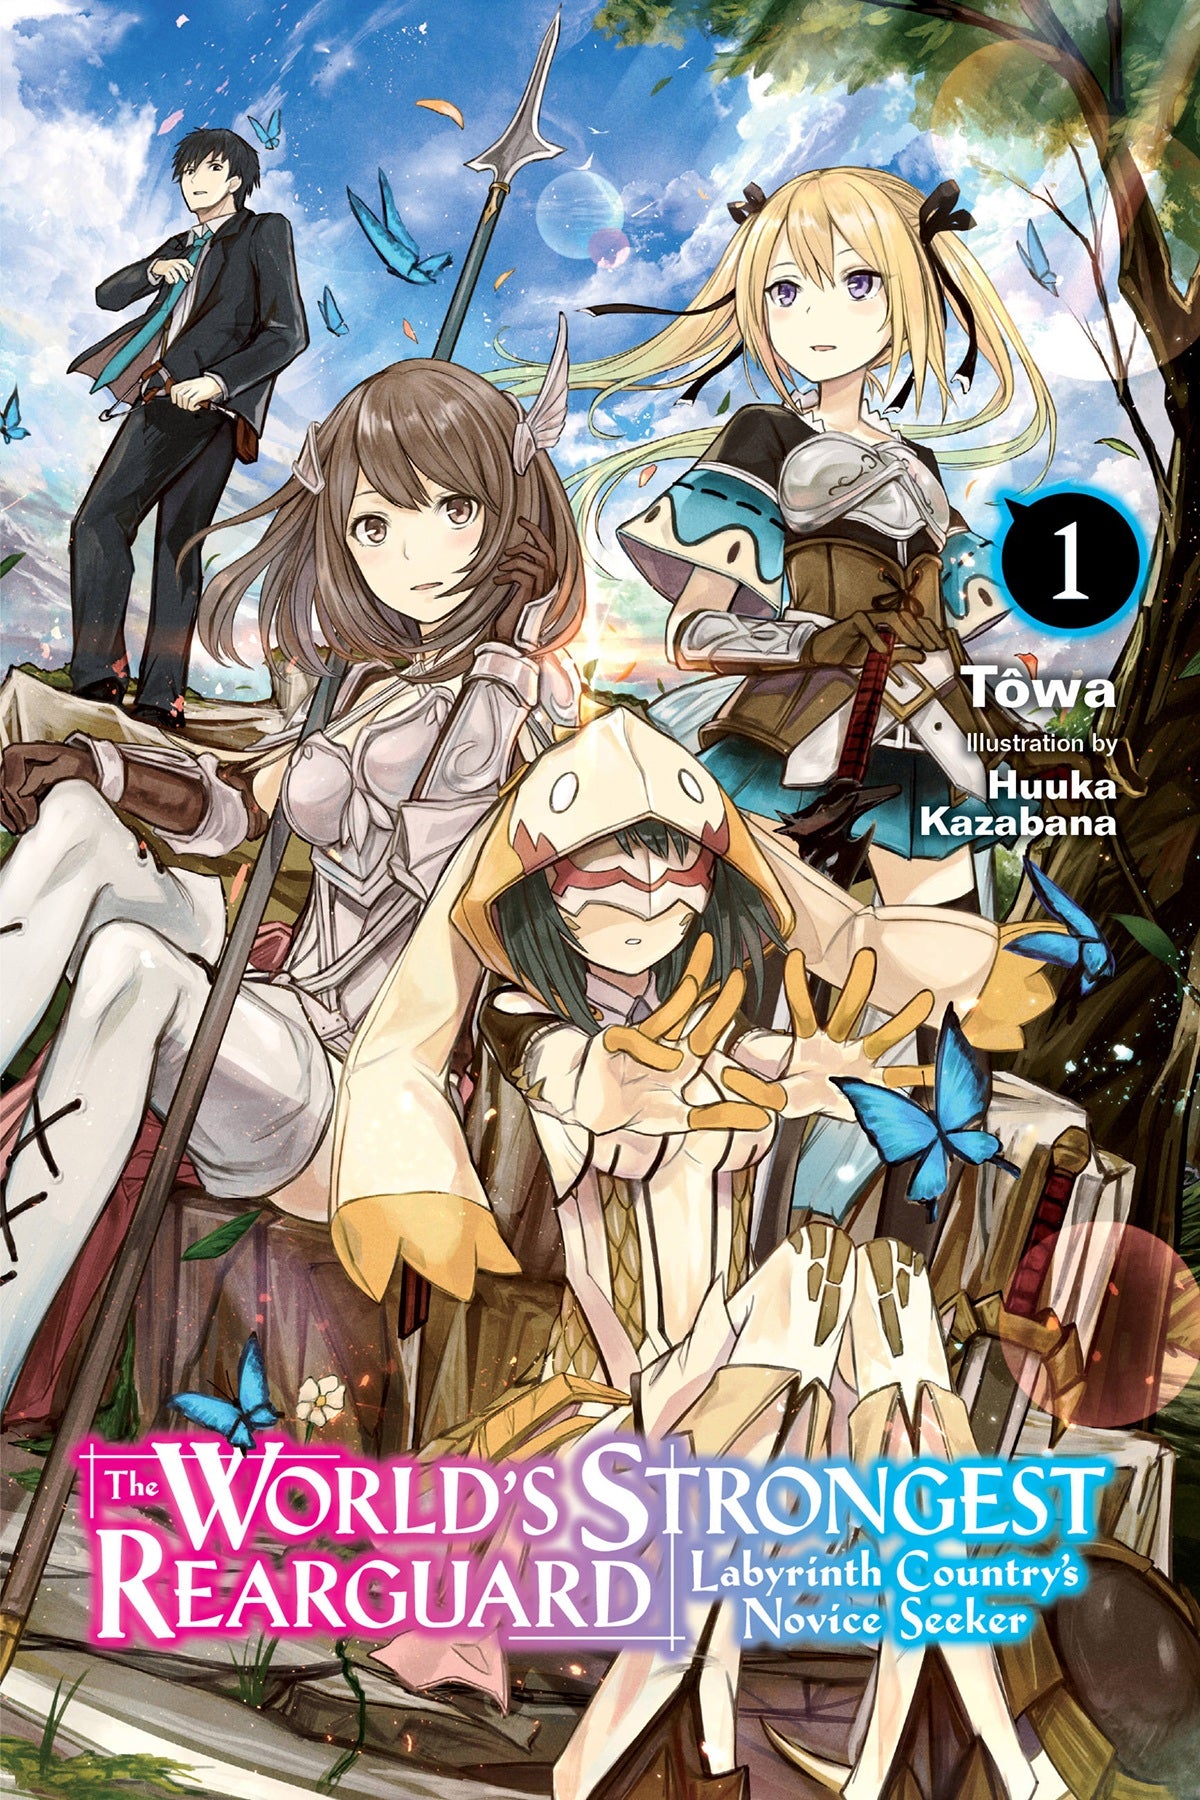 The World's Strongest Rearguard: Labyrinth Country's Novice Seeker Vol. 01 (Light Novel)